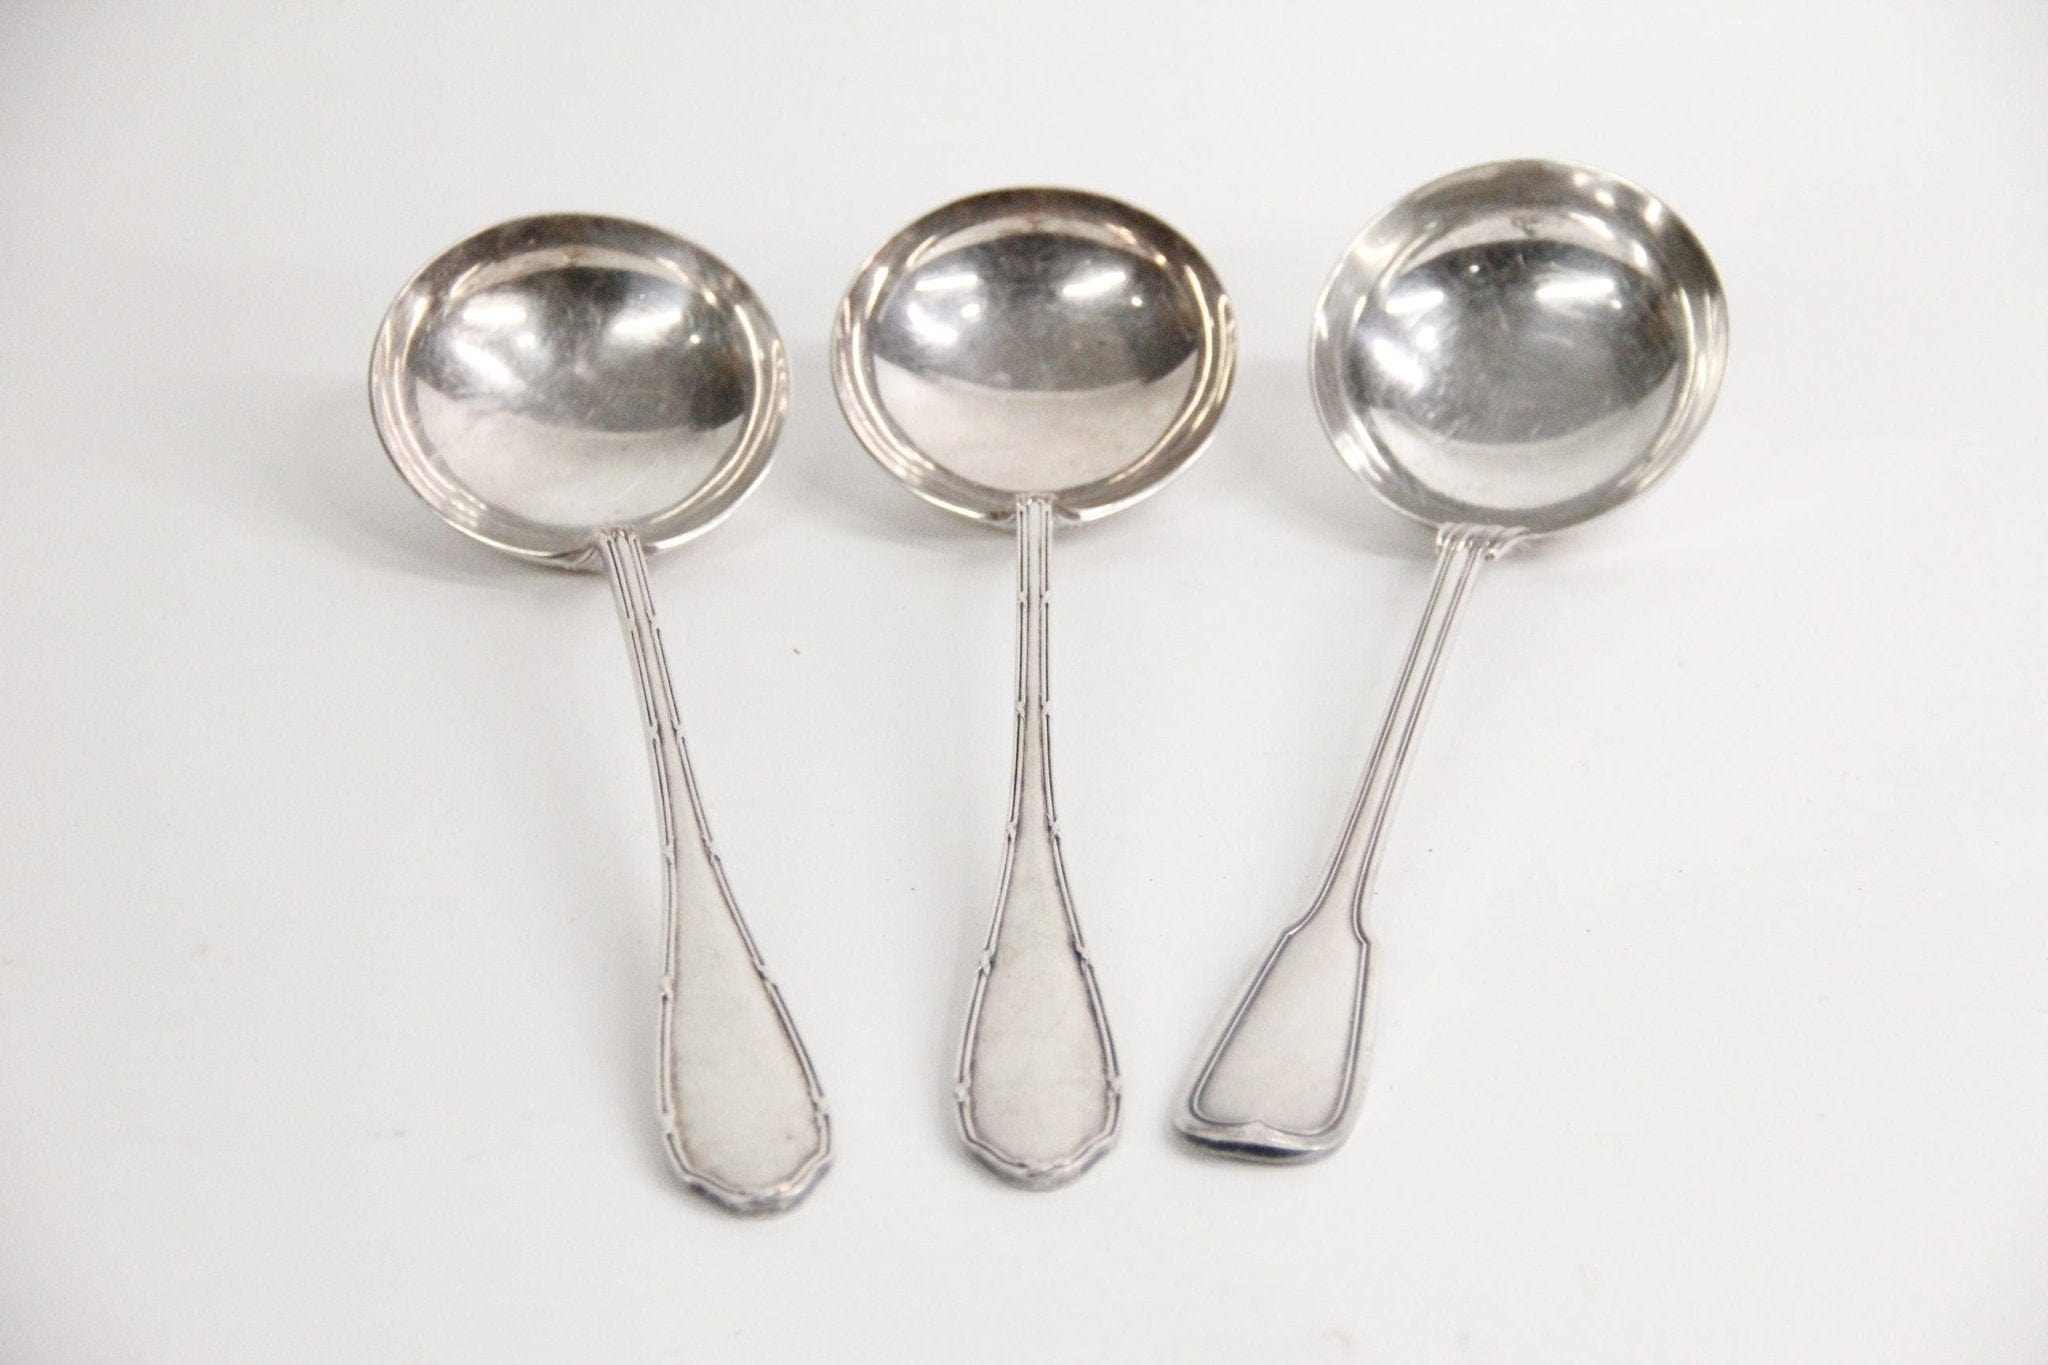 Antique French Silver Ladle | Large Hotelware - Debra Hall Lifestyle